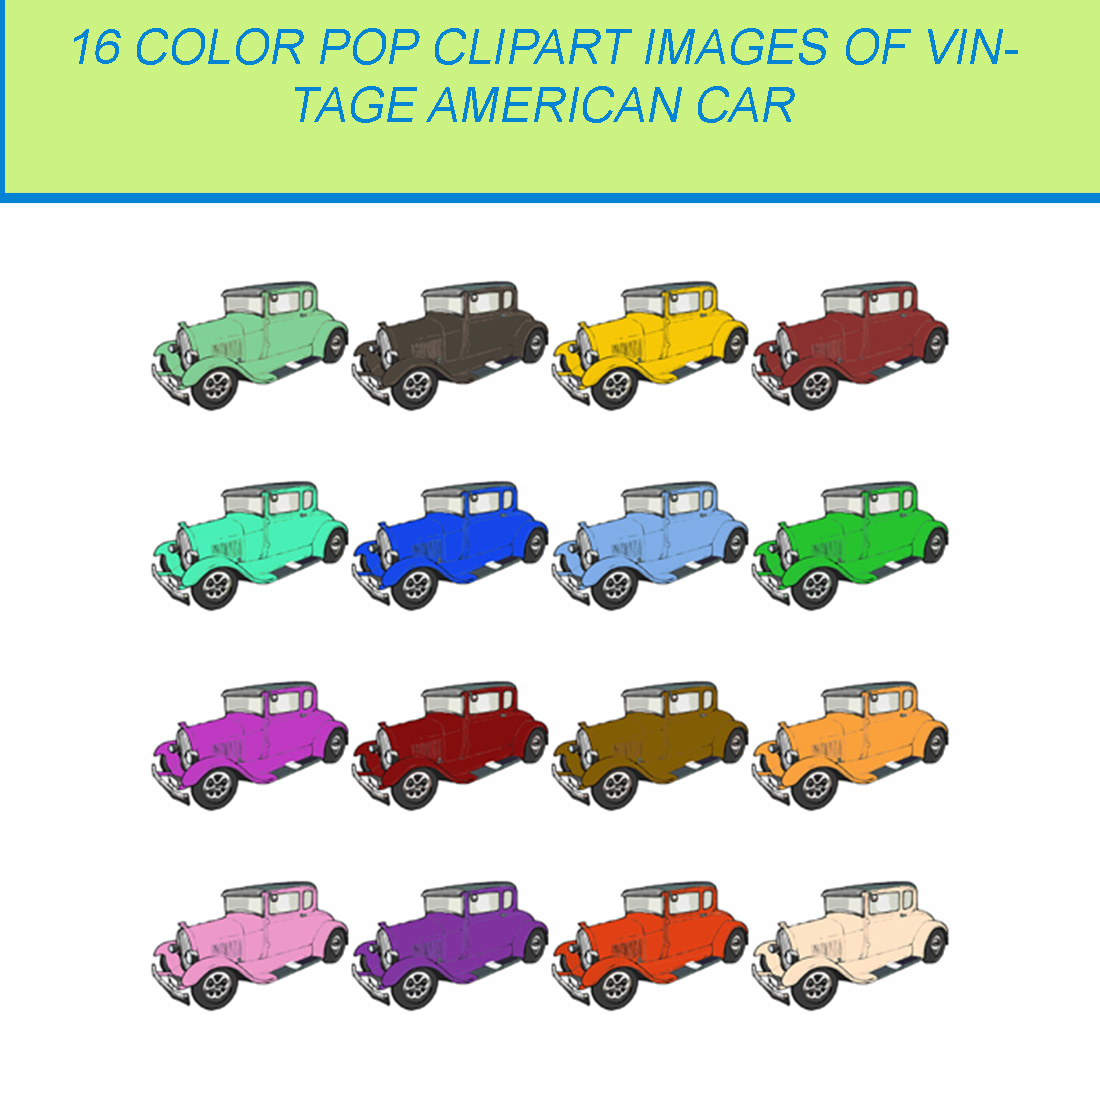 16 COLOR POP CLIPART IMAGES OF VINTAGE AMERICAN CAR cover image.